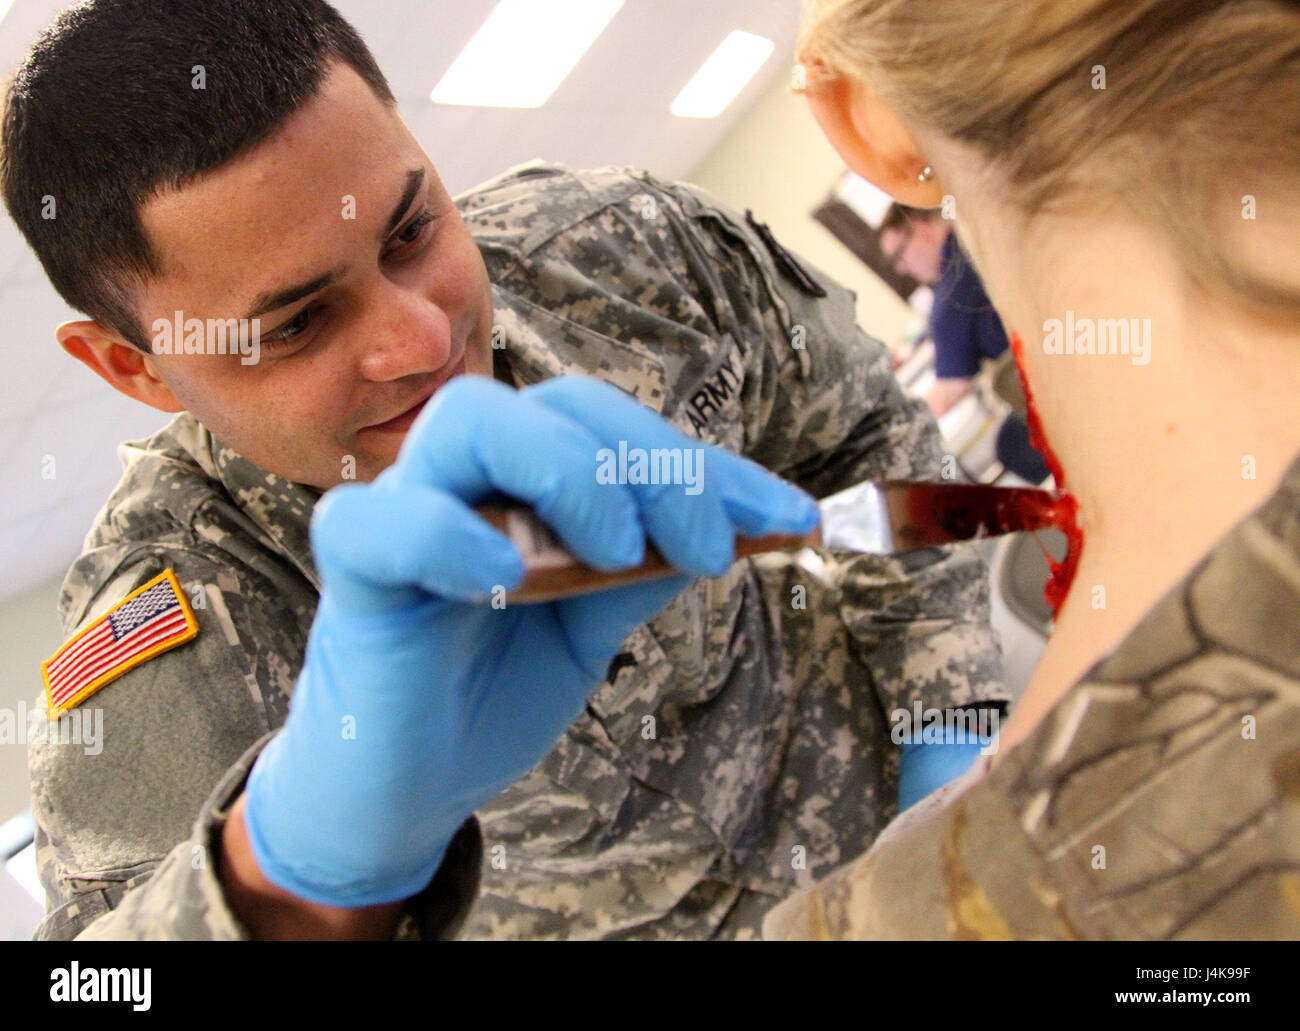 MUSCATATUCK URBAN TRAINING CENTER, Indiana – Sgt. Emmanuel Cabrera from Quebradillas, Puerto Rico, a logistic specialist with the U.S. Army Reserve’s 266th Ordnance Company, Aguadilla, Puerto Rico, creates an artificial laceration wound onto a civilian volunteer at the Muscatatuck Urban Training Center, Indiana, May 6, 2017. Nearly 4,100 Soldiers from across the country are participating in Guardian Response 17, a multi-component training exercise to validate U.S. Army units’ ability to support the Defense Support of Civil Authorities (DSCA) in the event of a Chemical, Biological, Radiological Stock Photo